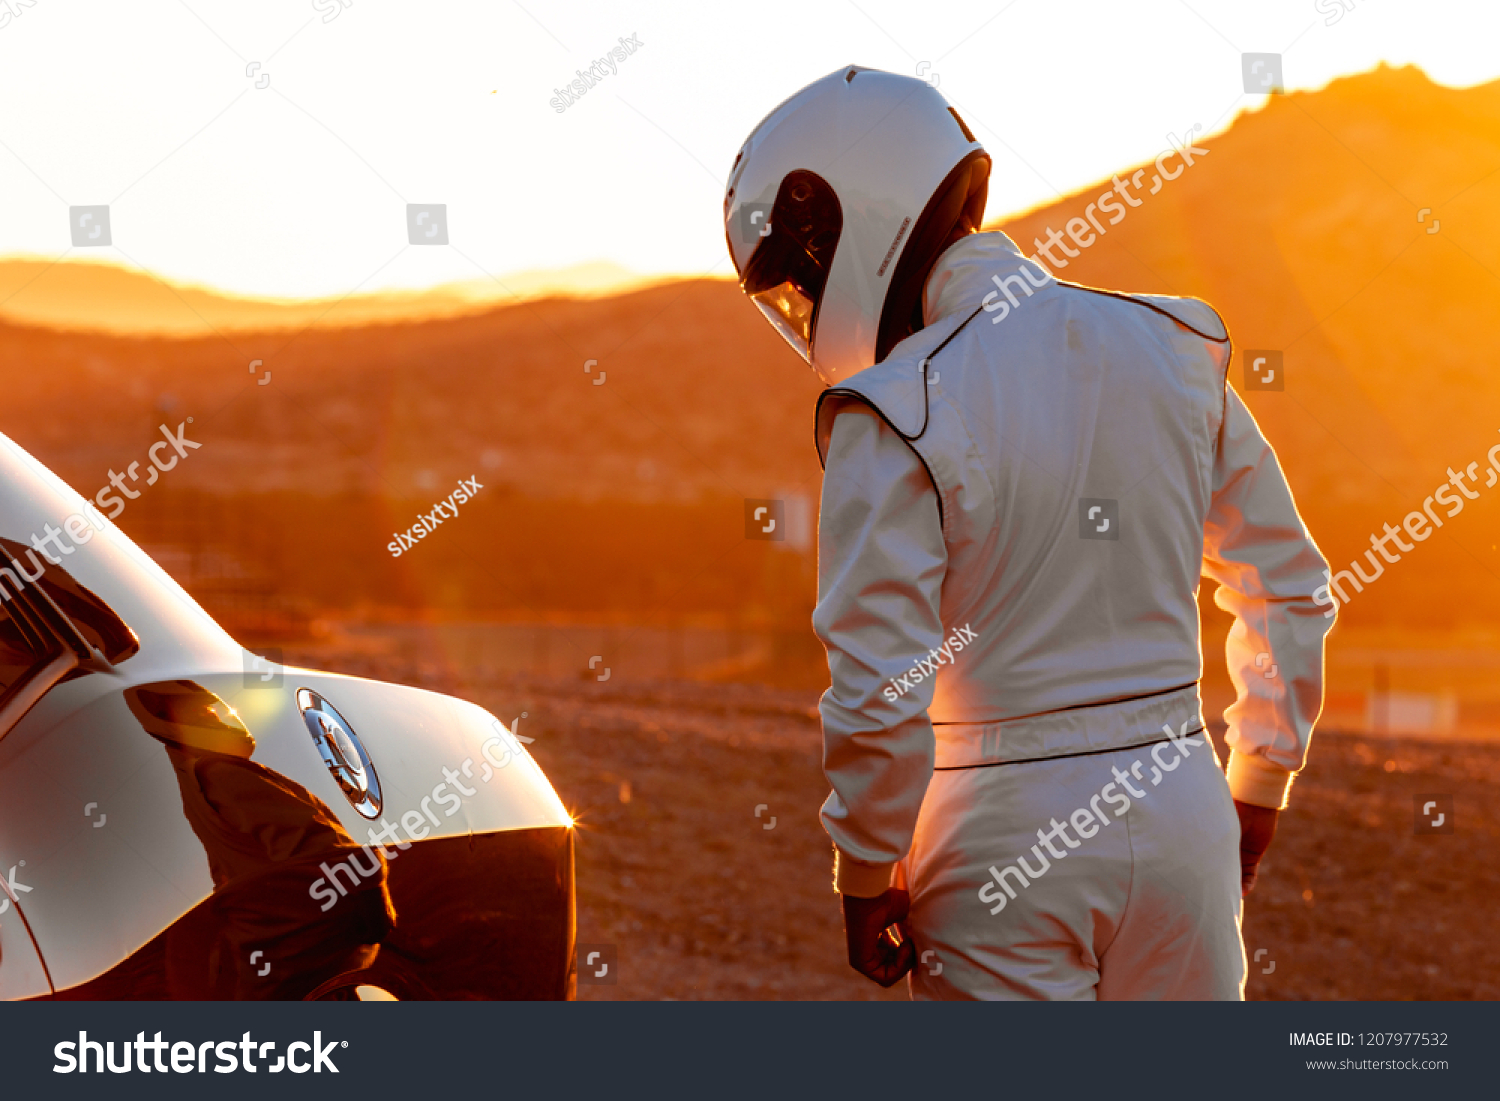 A Helmet Wearing Race Car Driver In The Early Morning Sun Looking At His Car Before Starting #1207977532